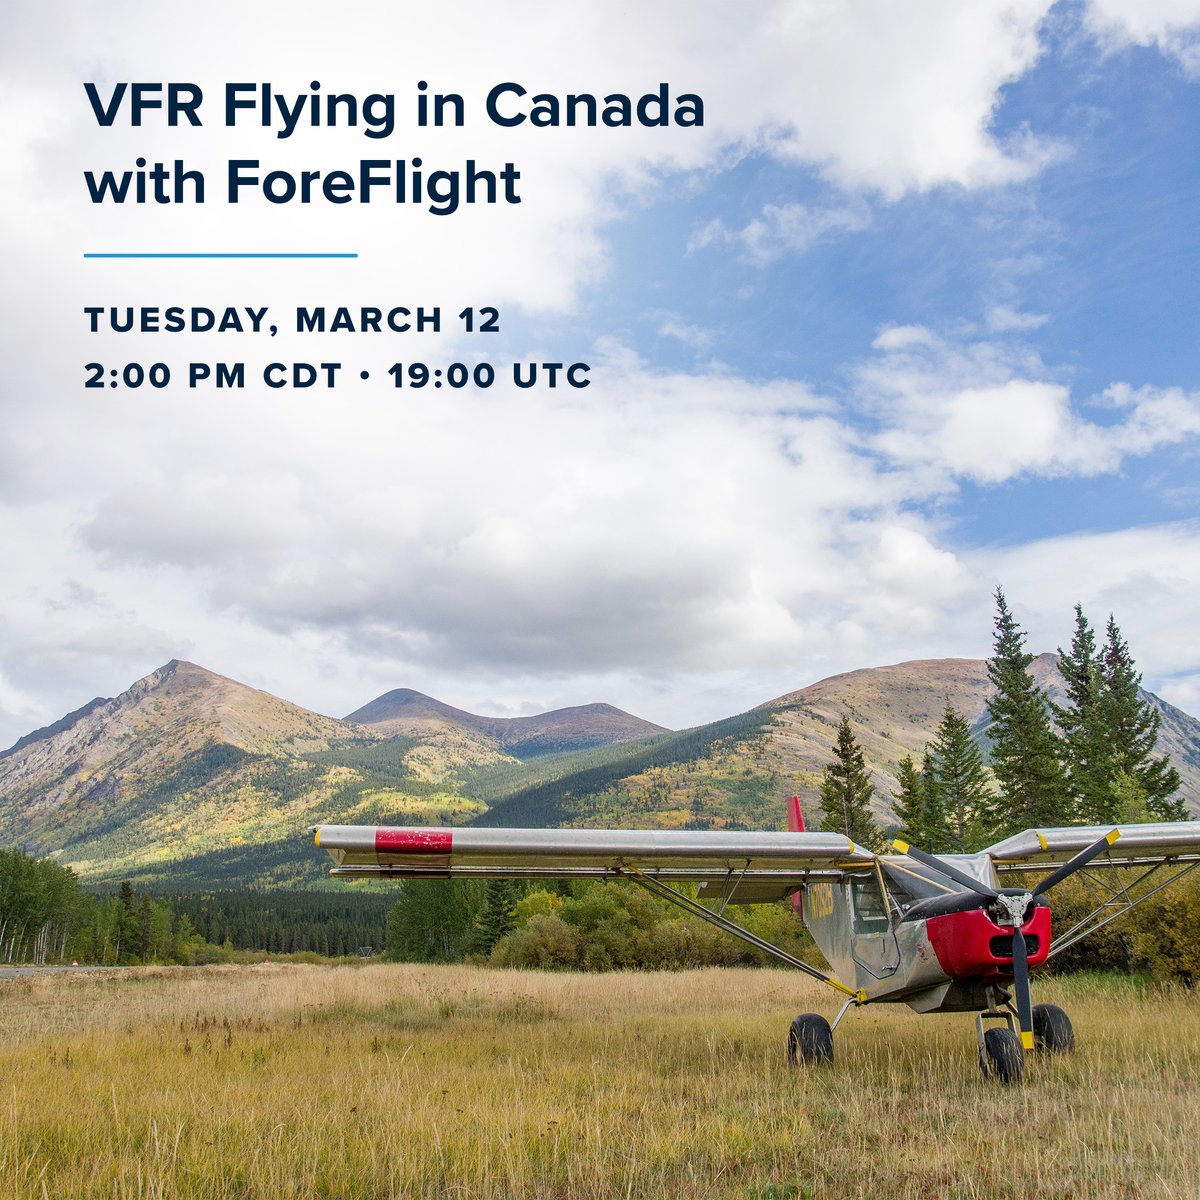 Registration for our next webinar is live!🧑‍💻✈️ Our Pilot Support Team will review some of ForeFlight’s most useful features for planning and conducting VFR flights, as well as some tools to increase your competency with ForeFlight. 🔗 Register here: bit.ly/4c7egjS